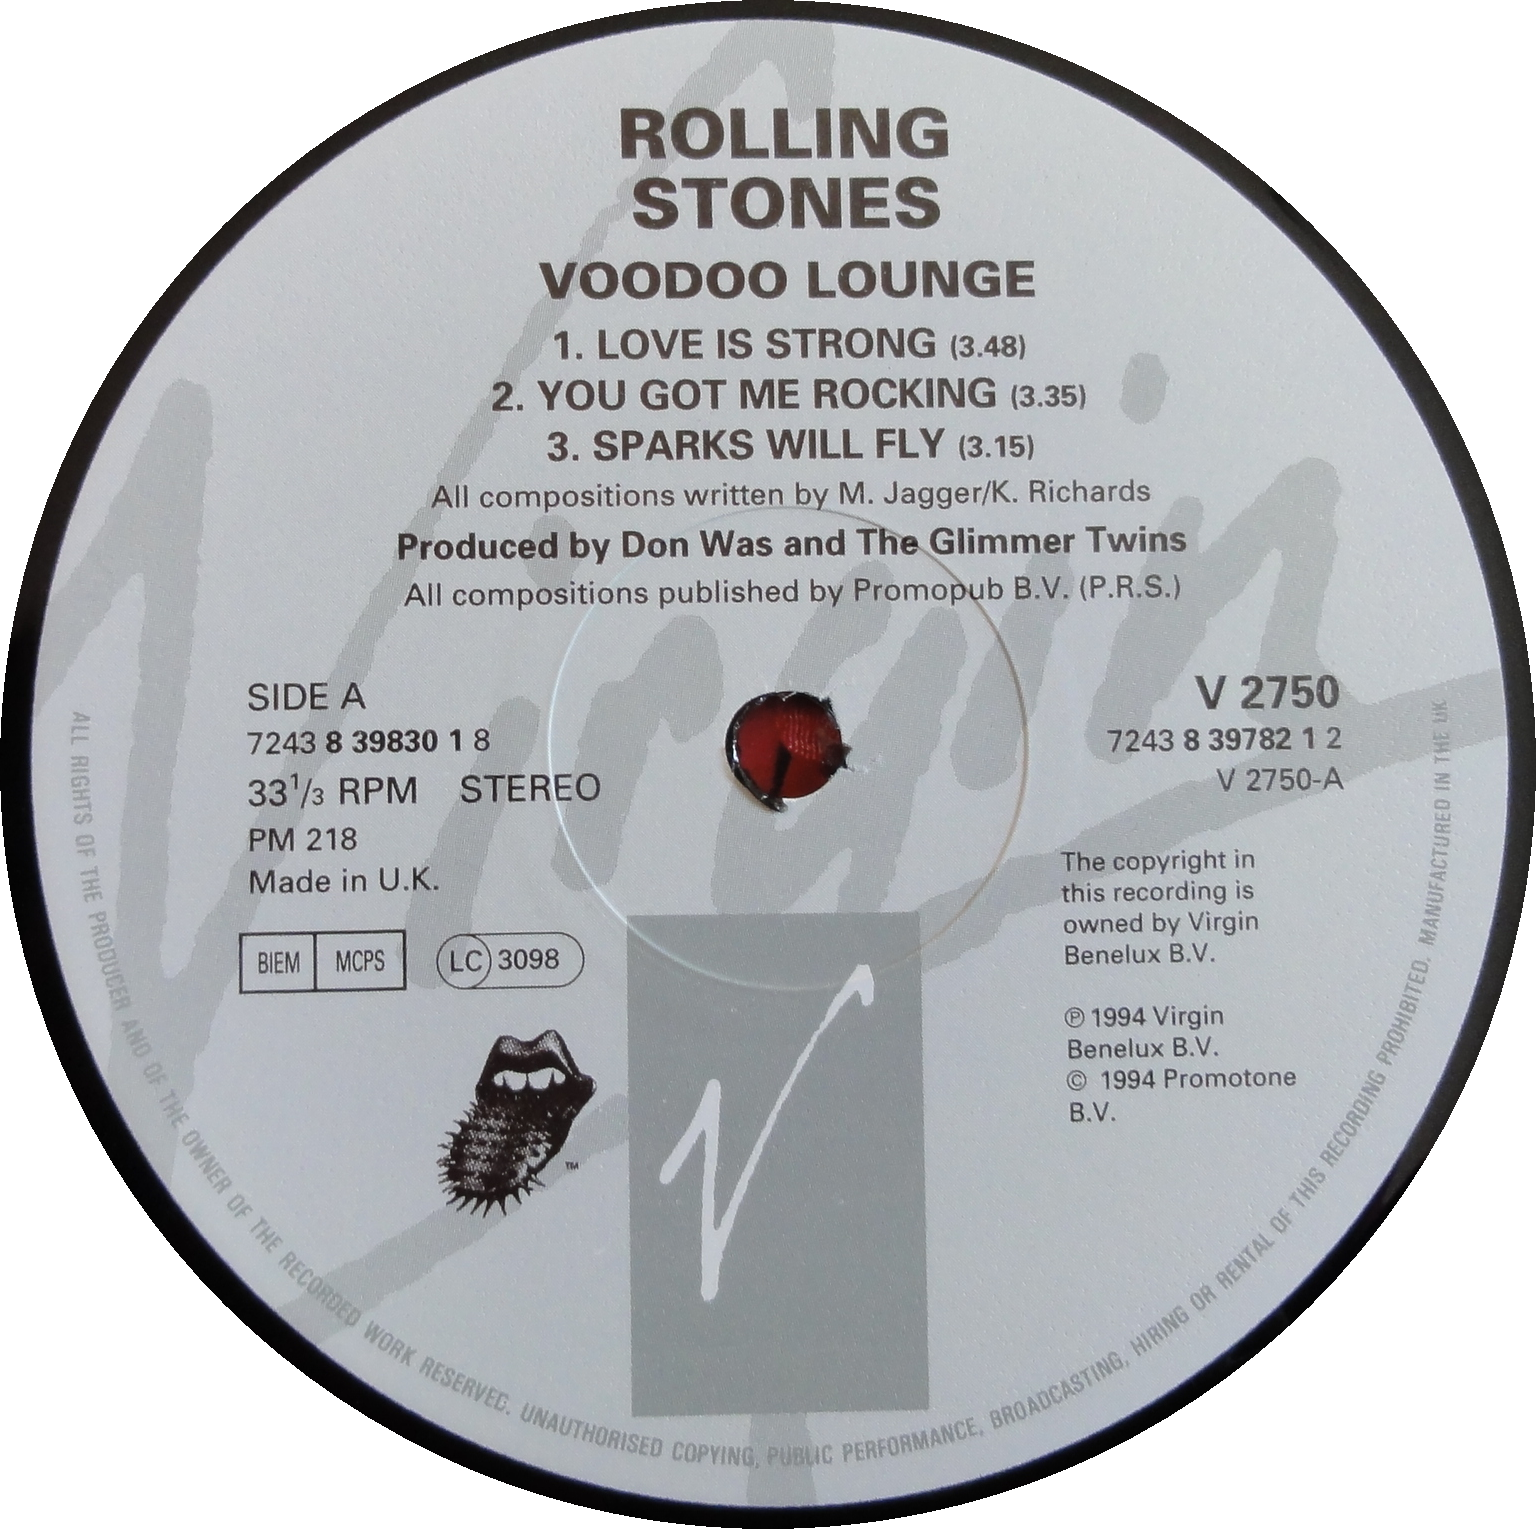 The Rolling Stones Voodoo Lounge 1994. Rolling Stones "Voodoo Lounge". Rolling Stones Voodoo Lounge обложка альбома. 1994 - Voodoo Lounge.